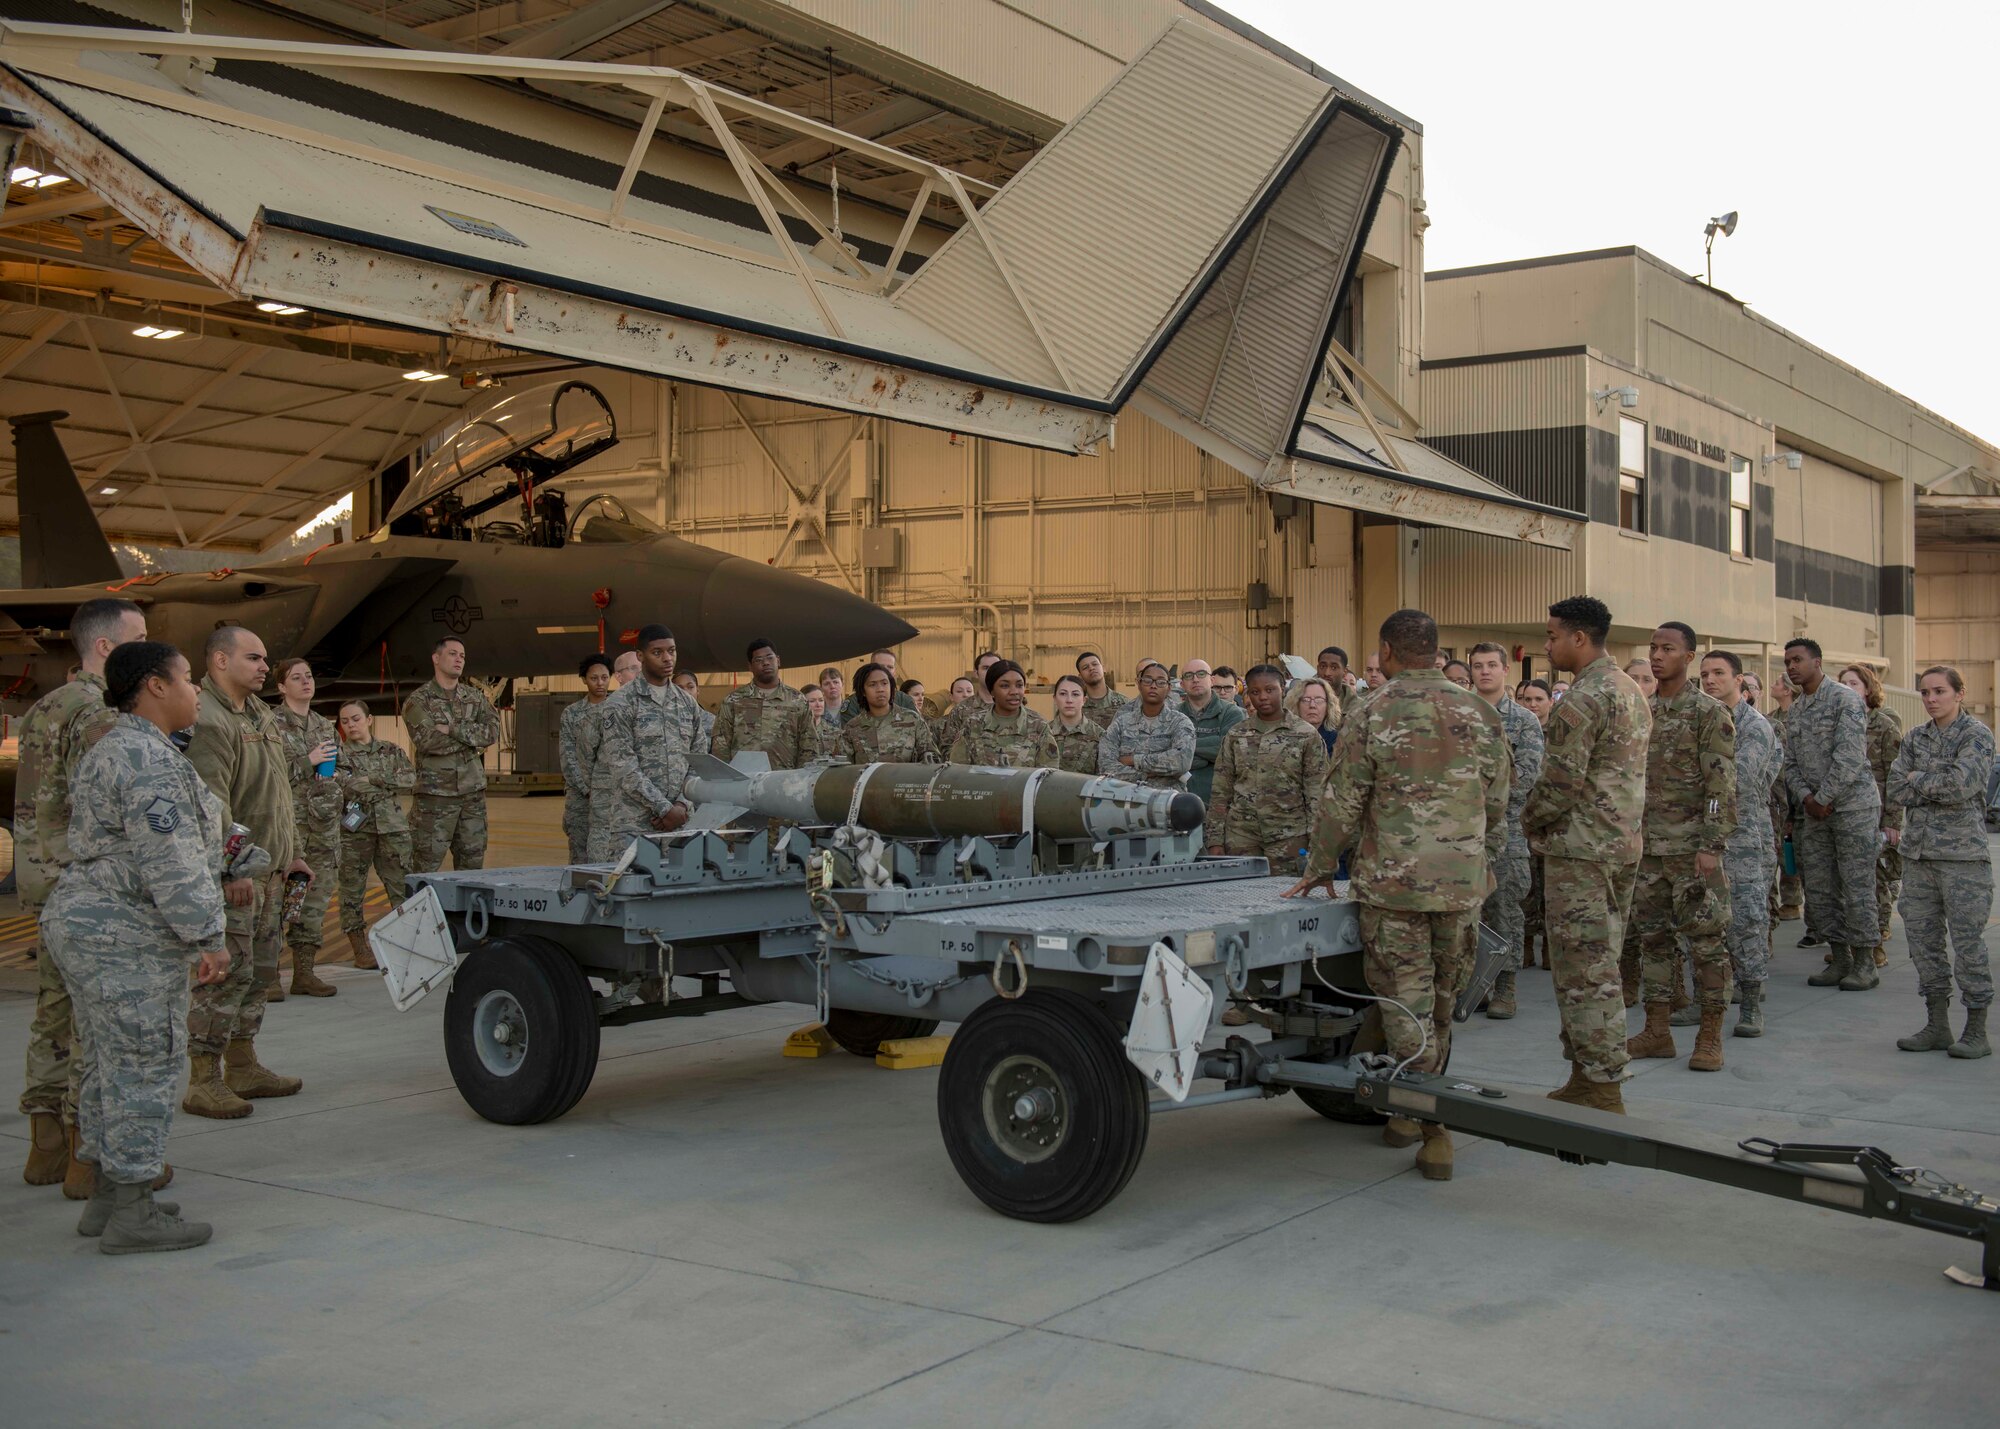 Airmen from the 4th Maintenance Group teach Airmen from the 4th Operations Medical Readiness Squadron about the type of munitions that can be mounted on an F-15E Strike Eagle, March 11, 2020, at Seymour Johnson Air Force Base, N.C.